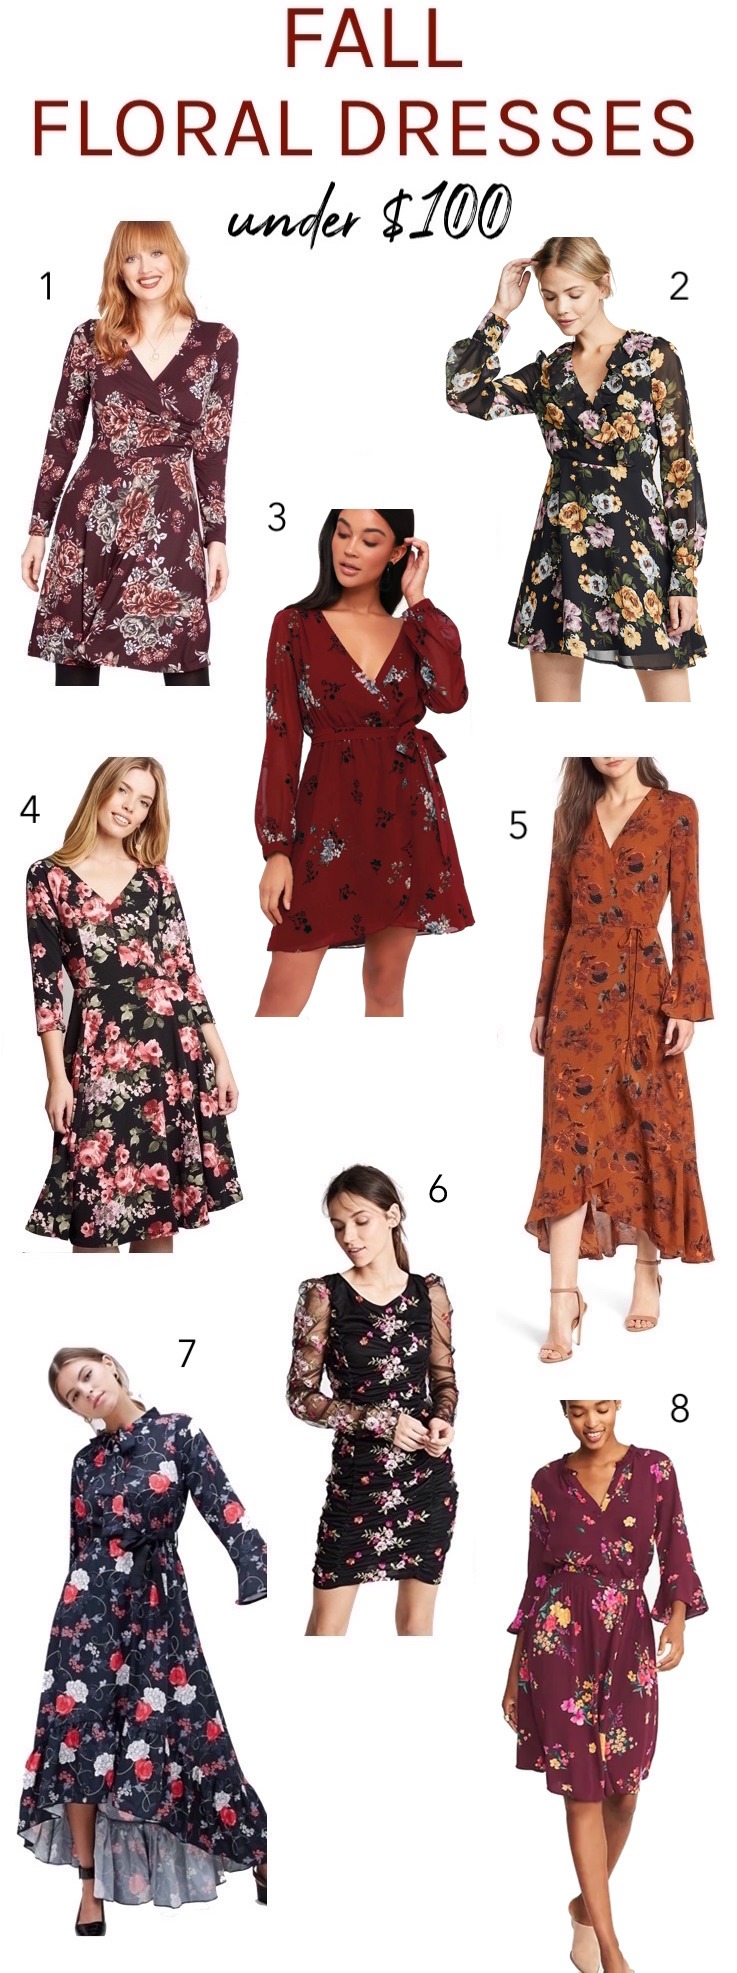 Floral dresses for fall under $100 | Swap out your summer sundresses for moody fall florals!